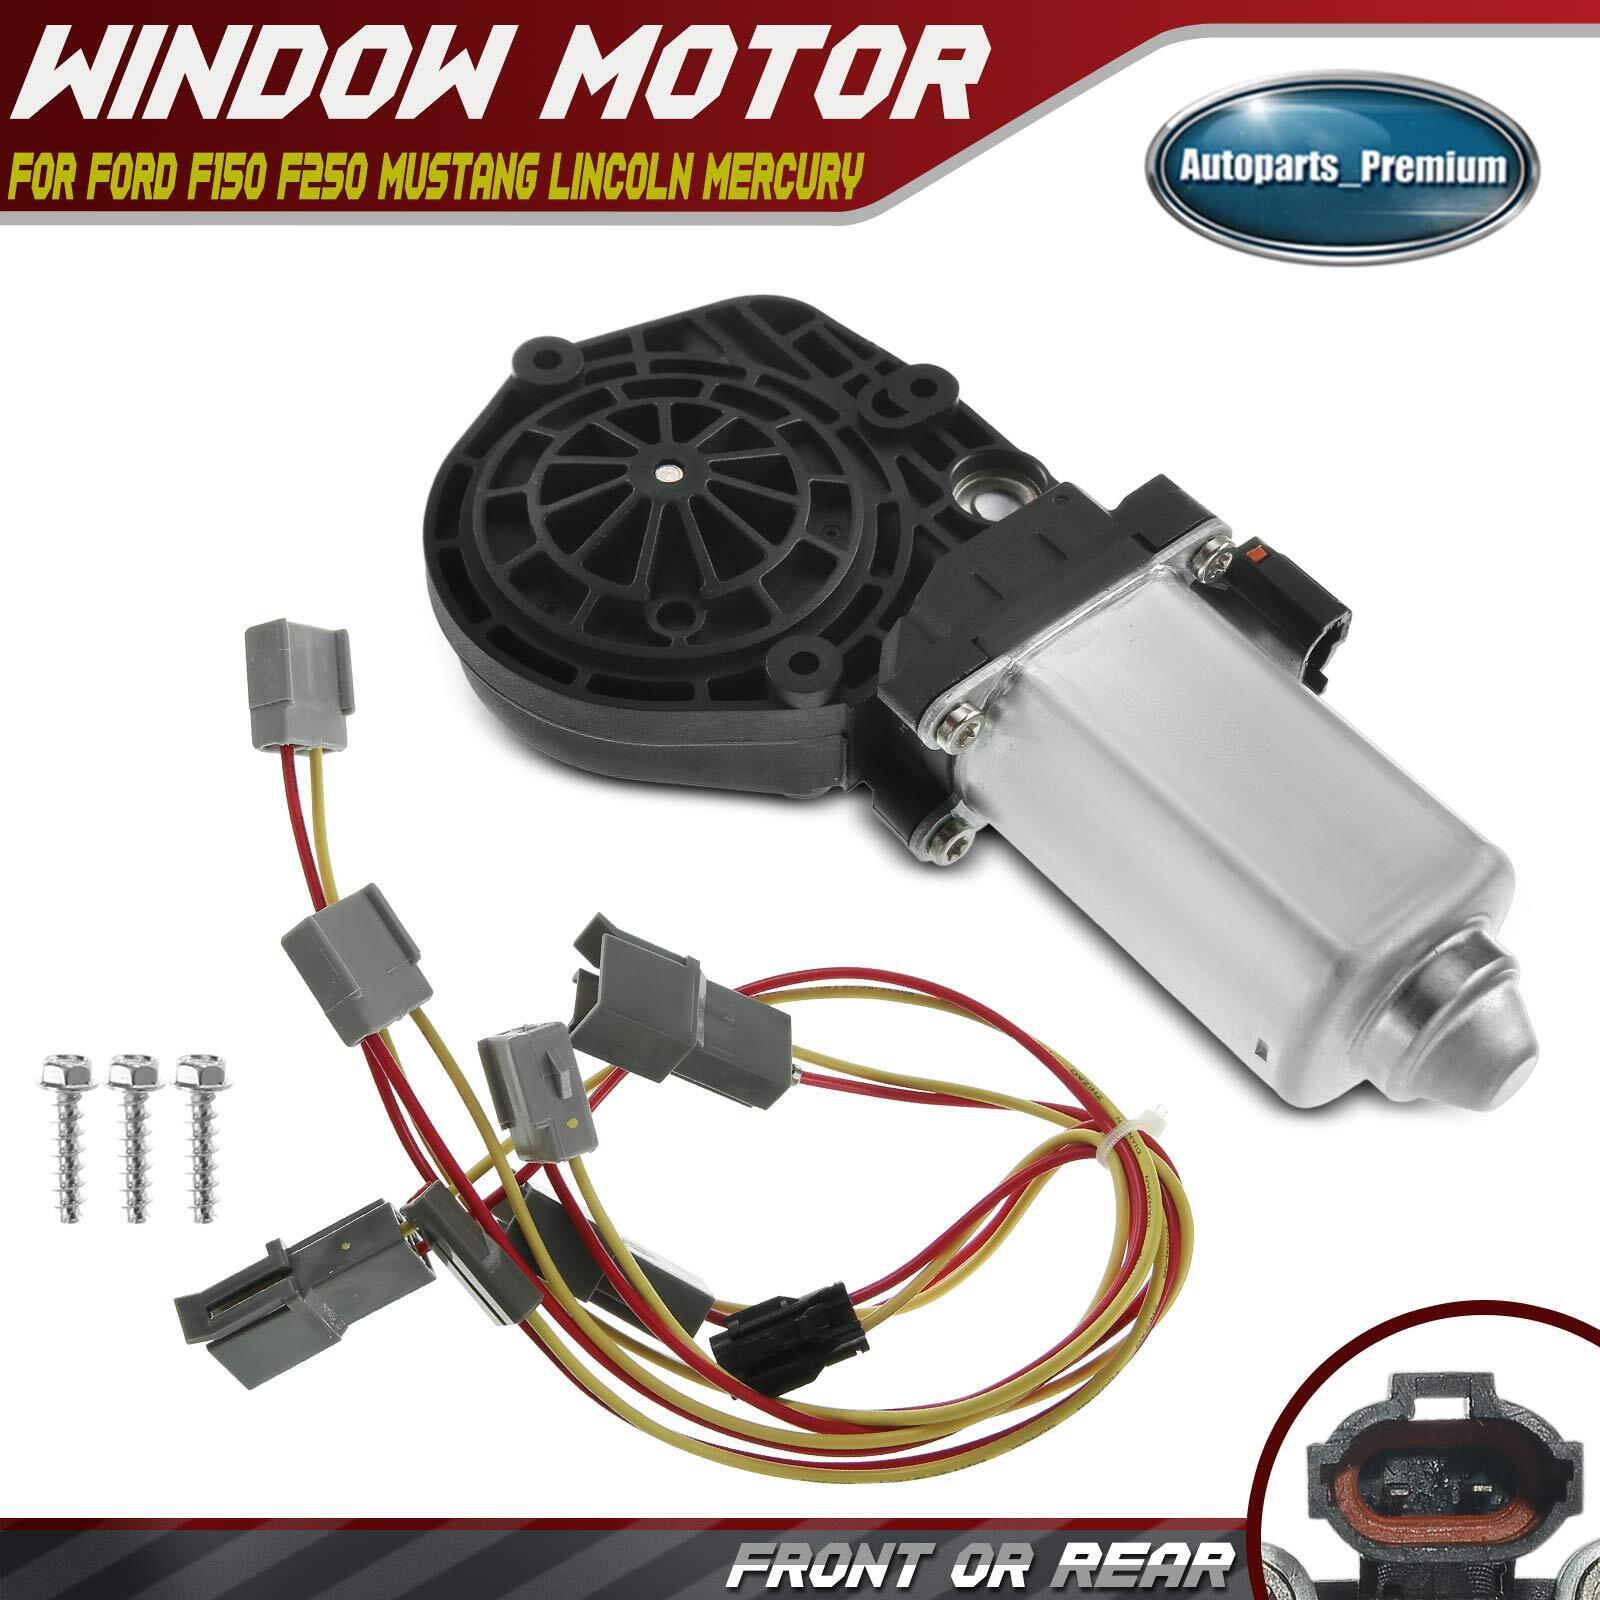 Window Lift Motor for Ford F-150 F-250 Mustang Lincoln Town Car Mercury 742-251